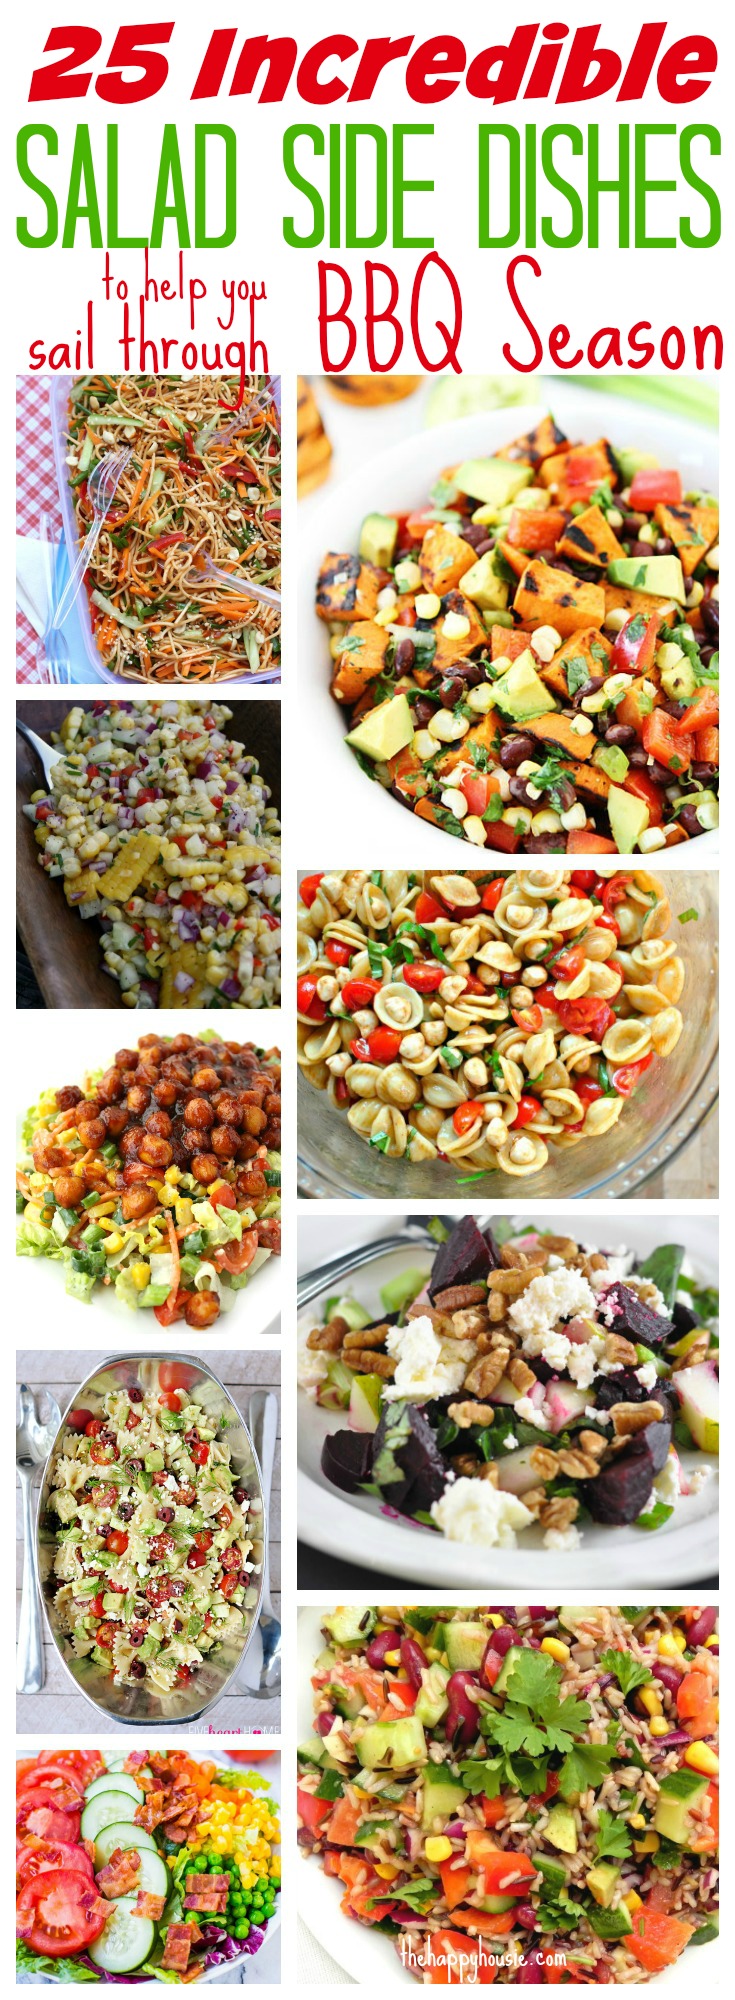 Never worry about what to bring to a BBQ again with this fabulous list of 25 incredible BBQ Salad Side Dishes poster.